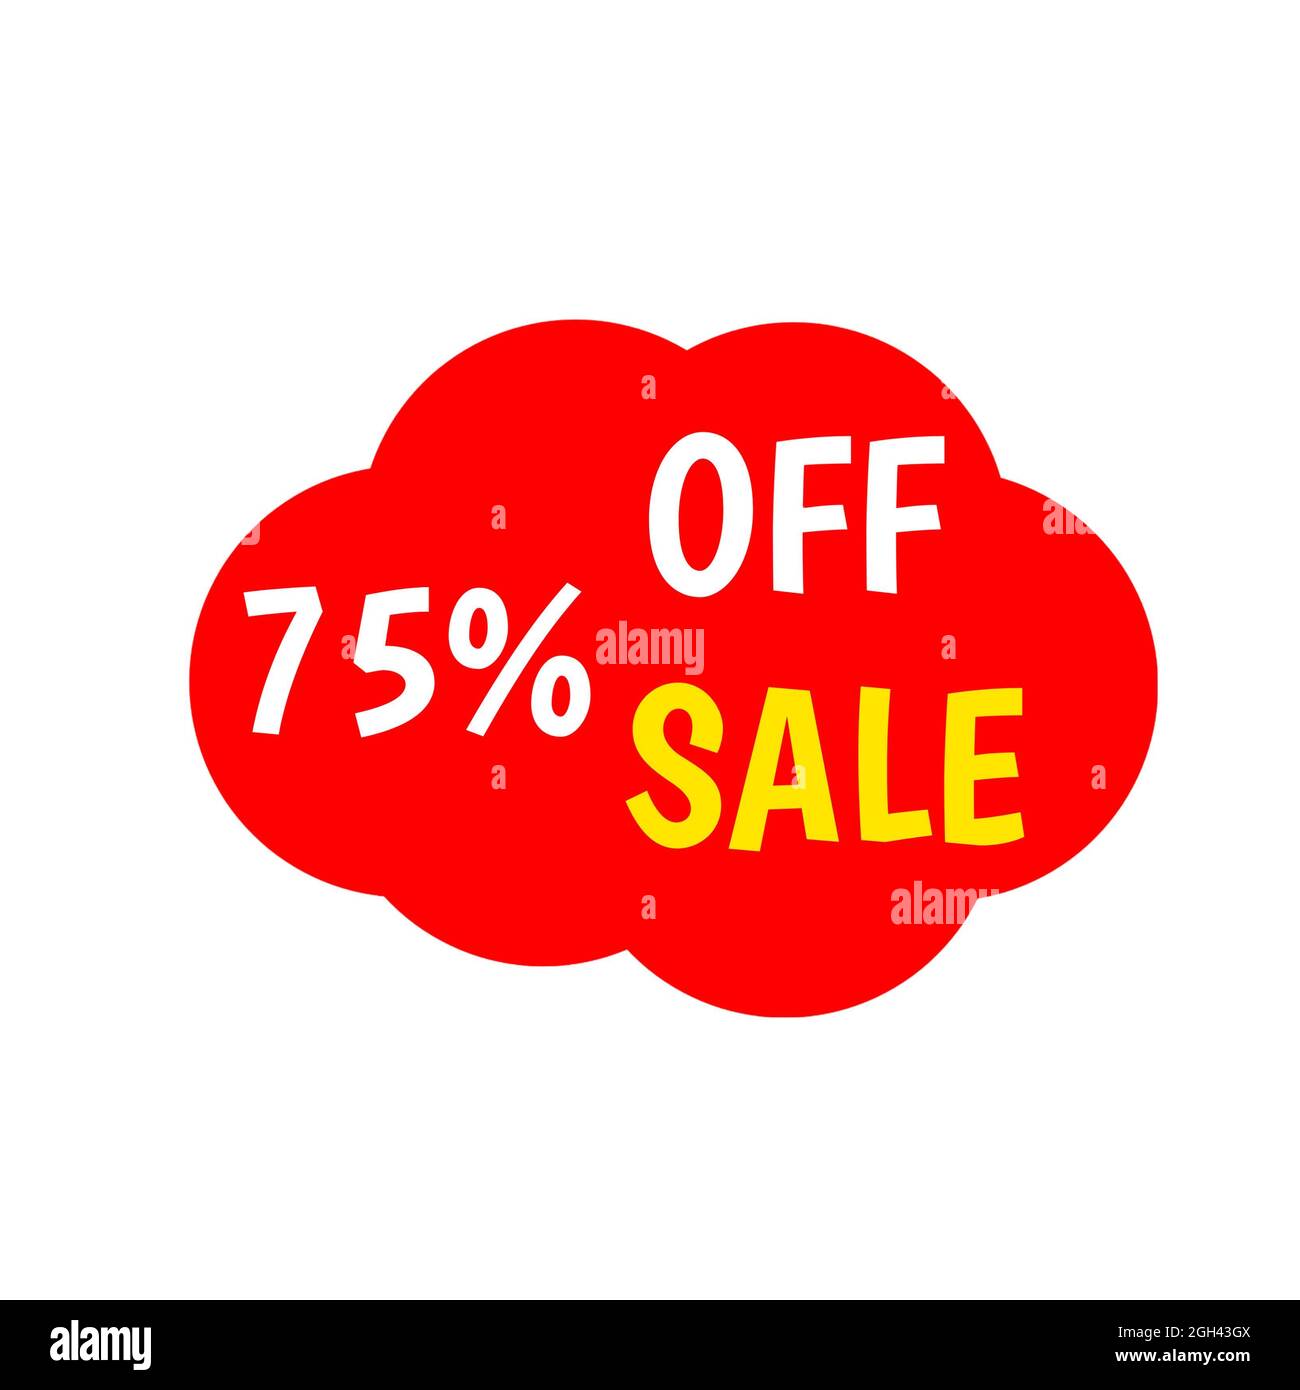 https://c8.alamy.com/comp/2GH43GX/special-75-percent-offer-sale-tag-red-clouds-for-sales-and-promotion-isolated-3d-discount-icon-or-sticker-yellow-and-white-business-advertising-2GH43GX.jpg